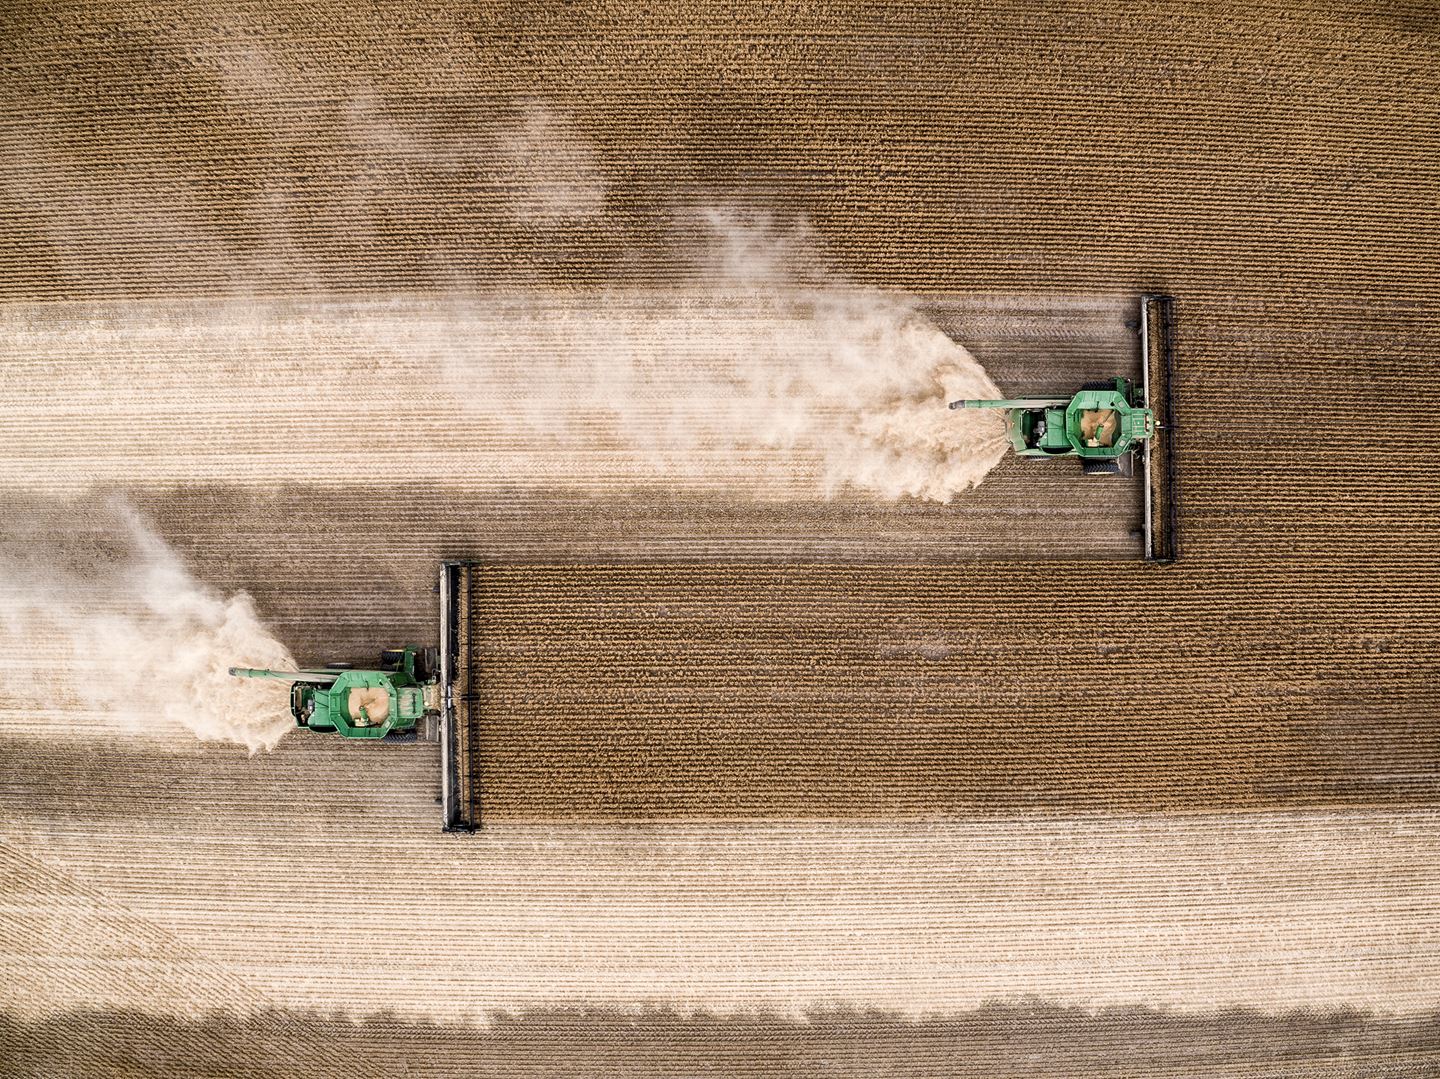 An aerial drone shot of two green harvester machines working parallel to one another in a golden paddock.